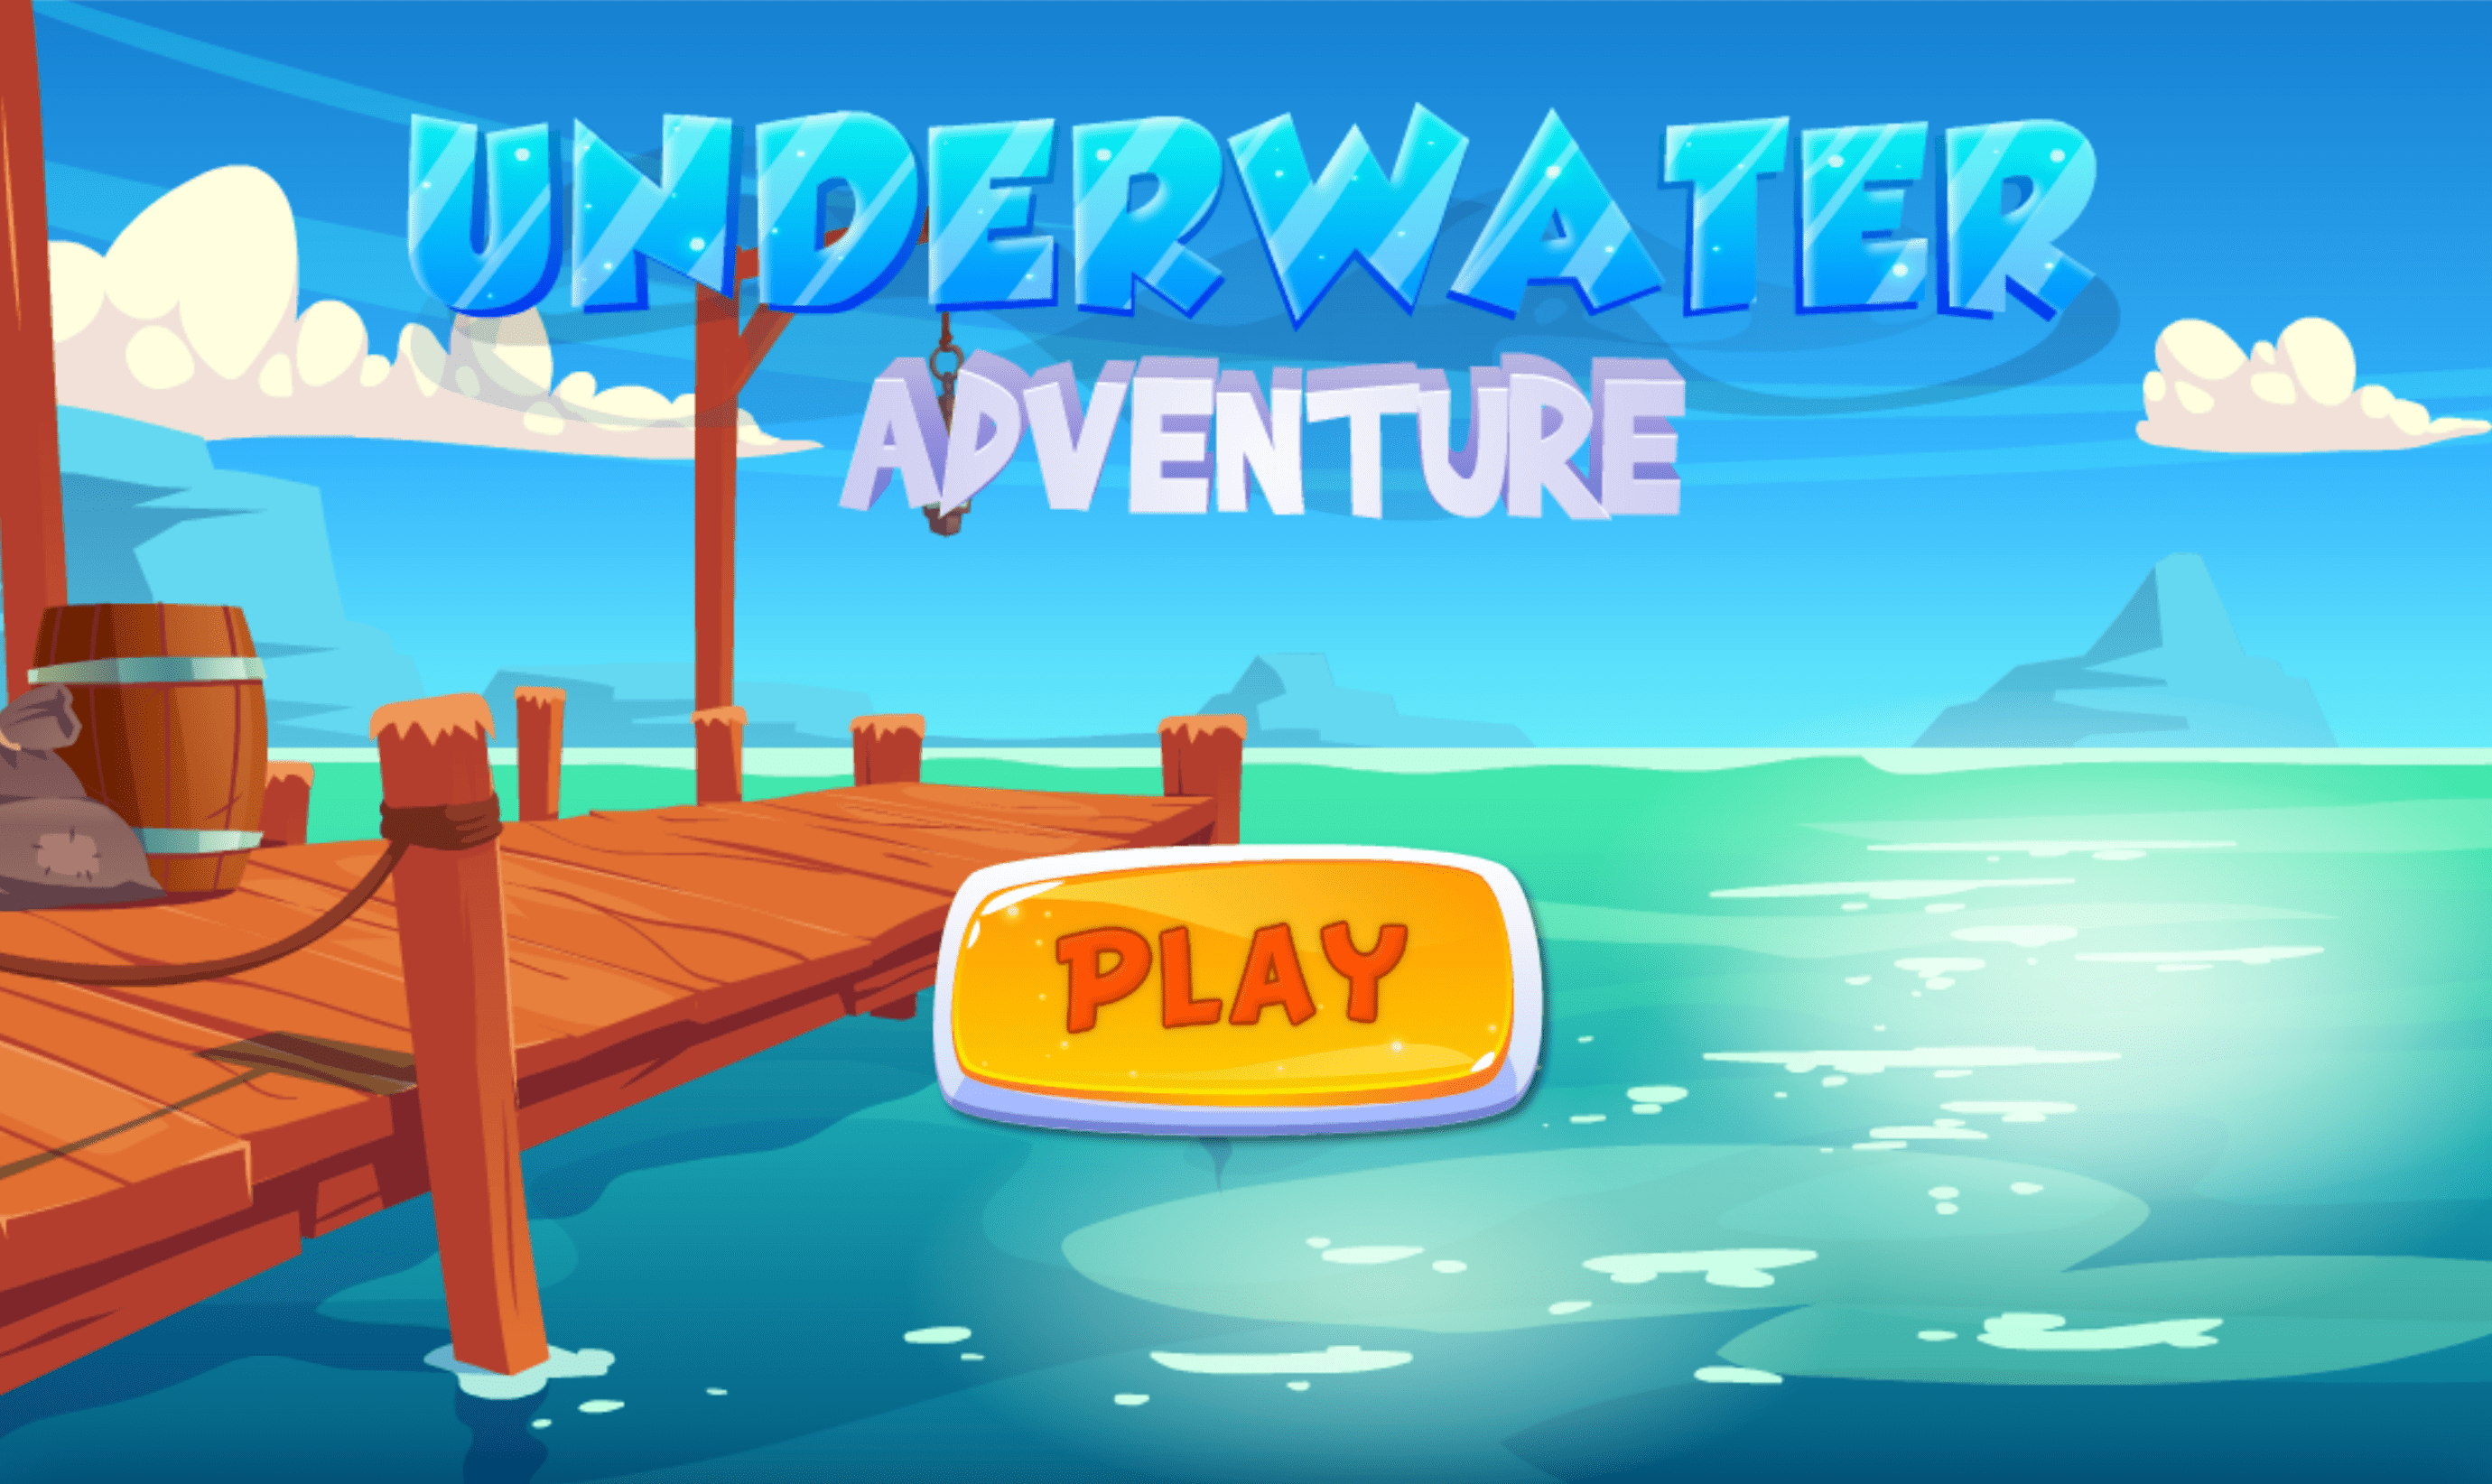 An ocean and dock in the background, with a play button and the words "Underwater Adventure" in the foreground